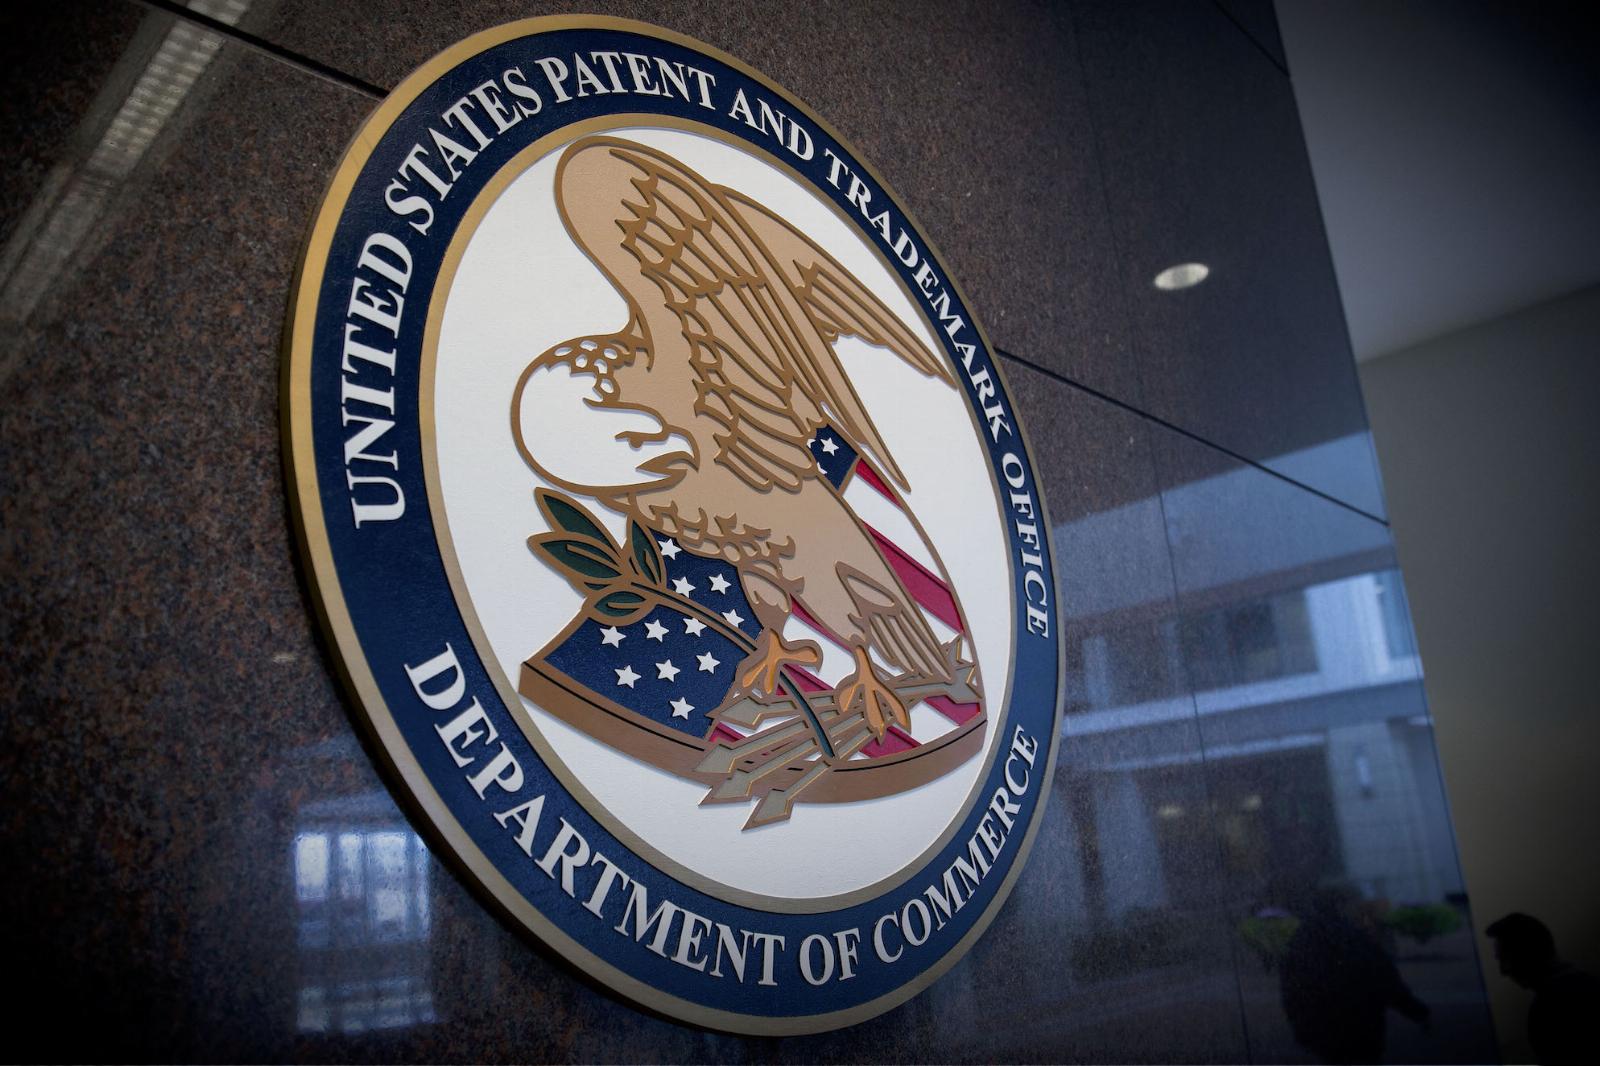 US Patent and Trademark Office notifies filers of years-long data leak